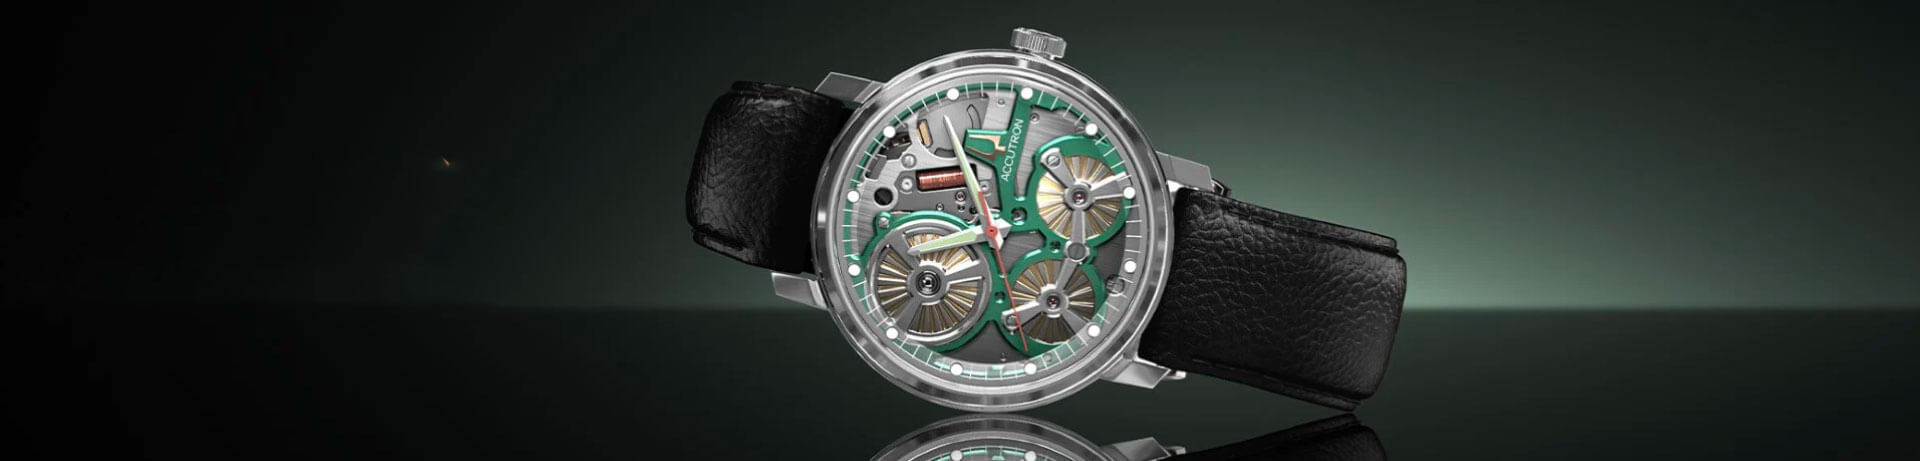 Spaceview 2020 Watch 2ES6A007 | ACCUTRON